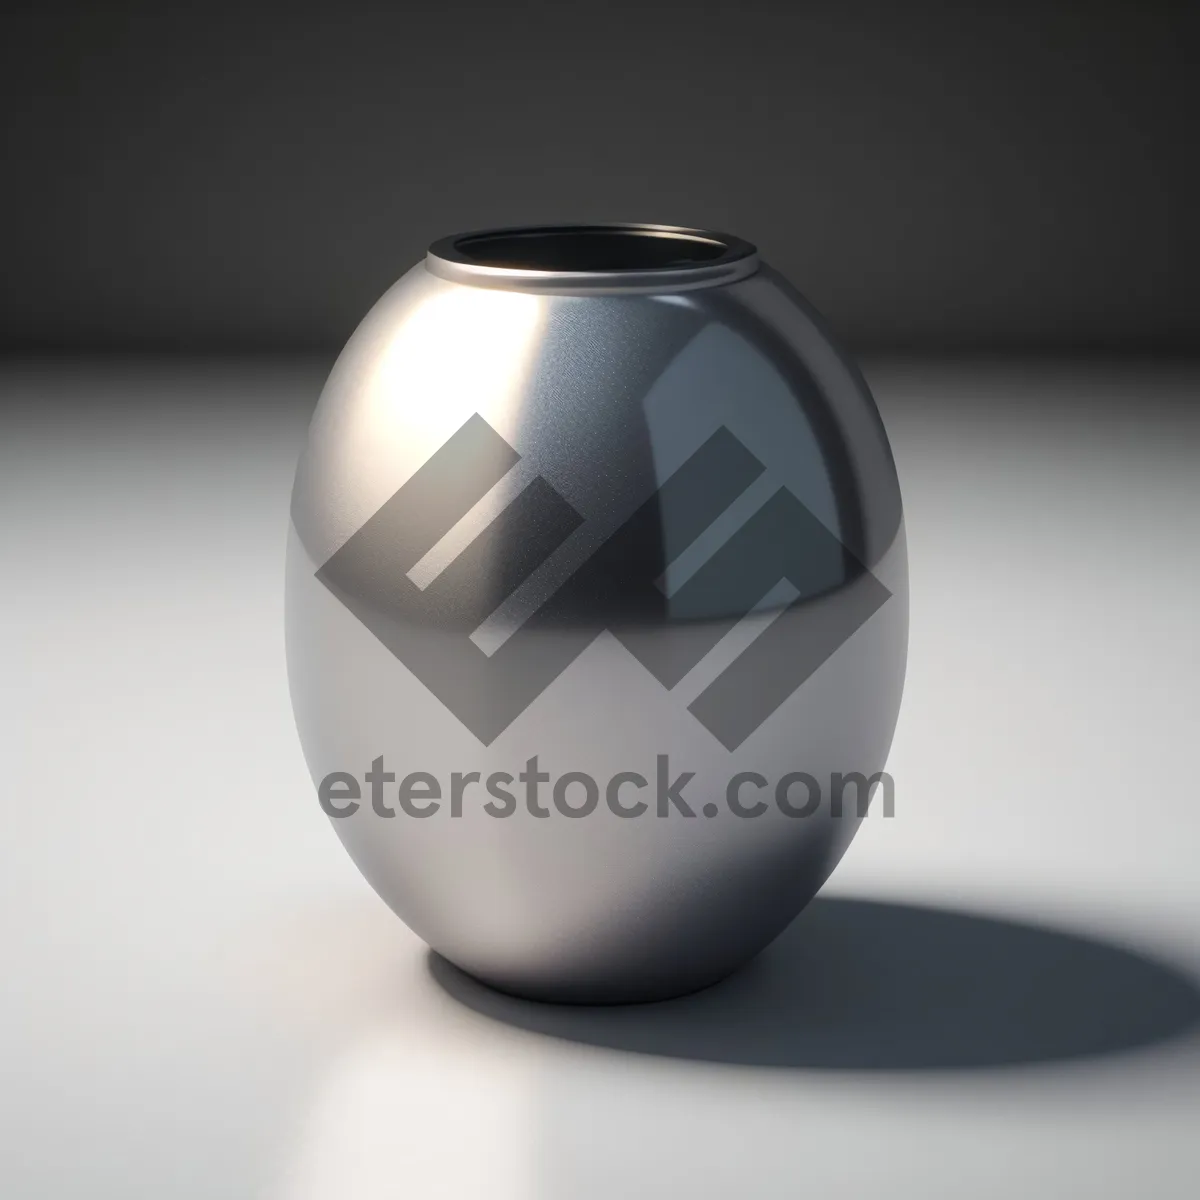 Picture of Shiny Glass Egg Sphere - 3D Symbol